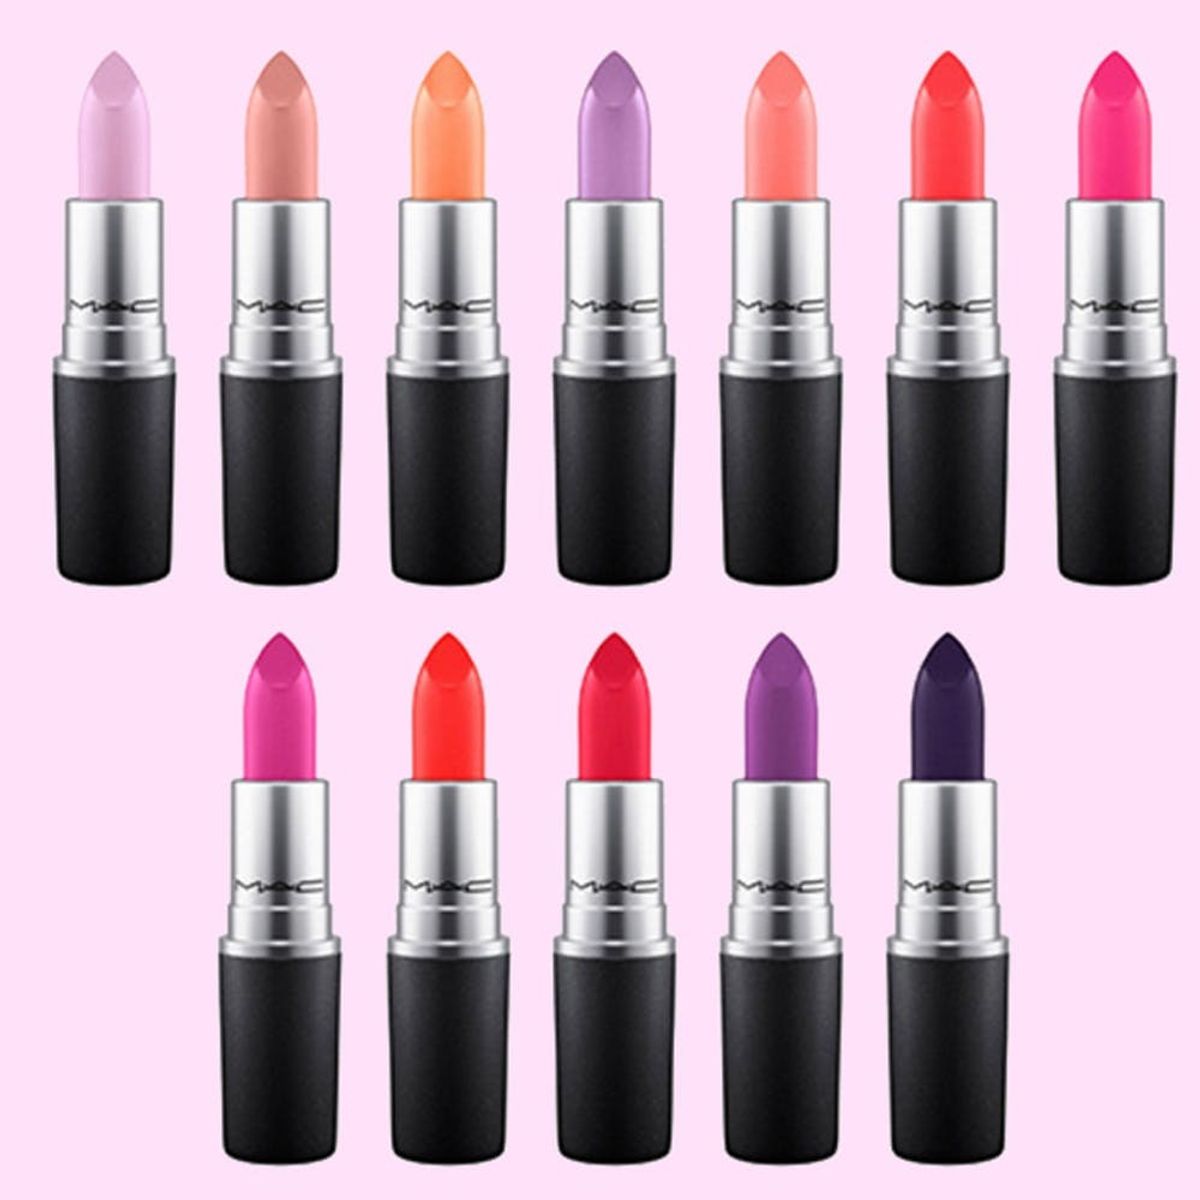 MAC Just Released 18 Amazing New Summer Lipstick Colors